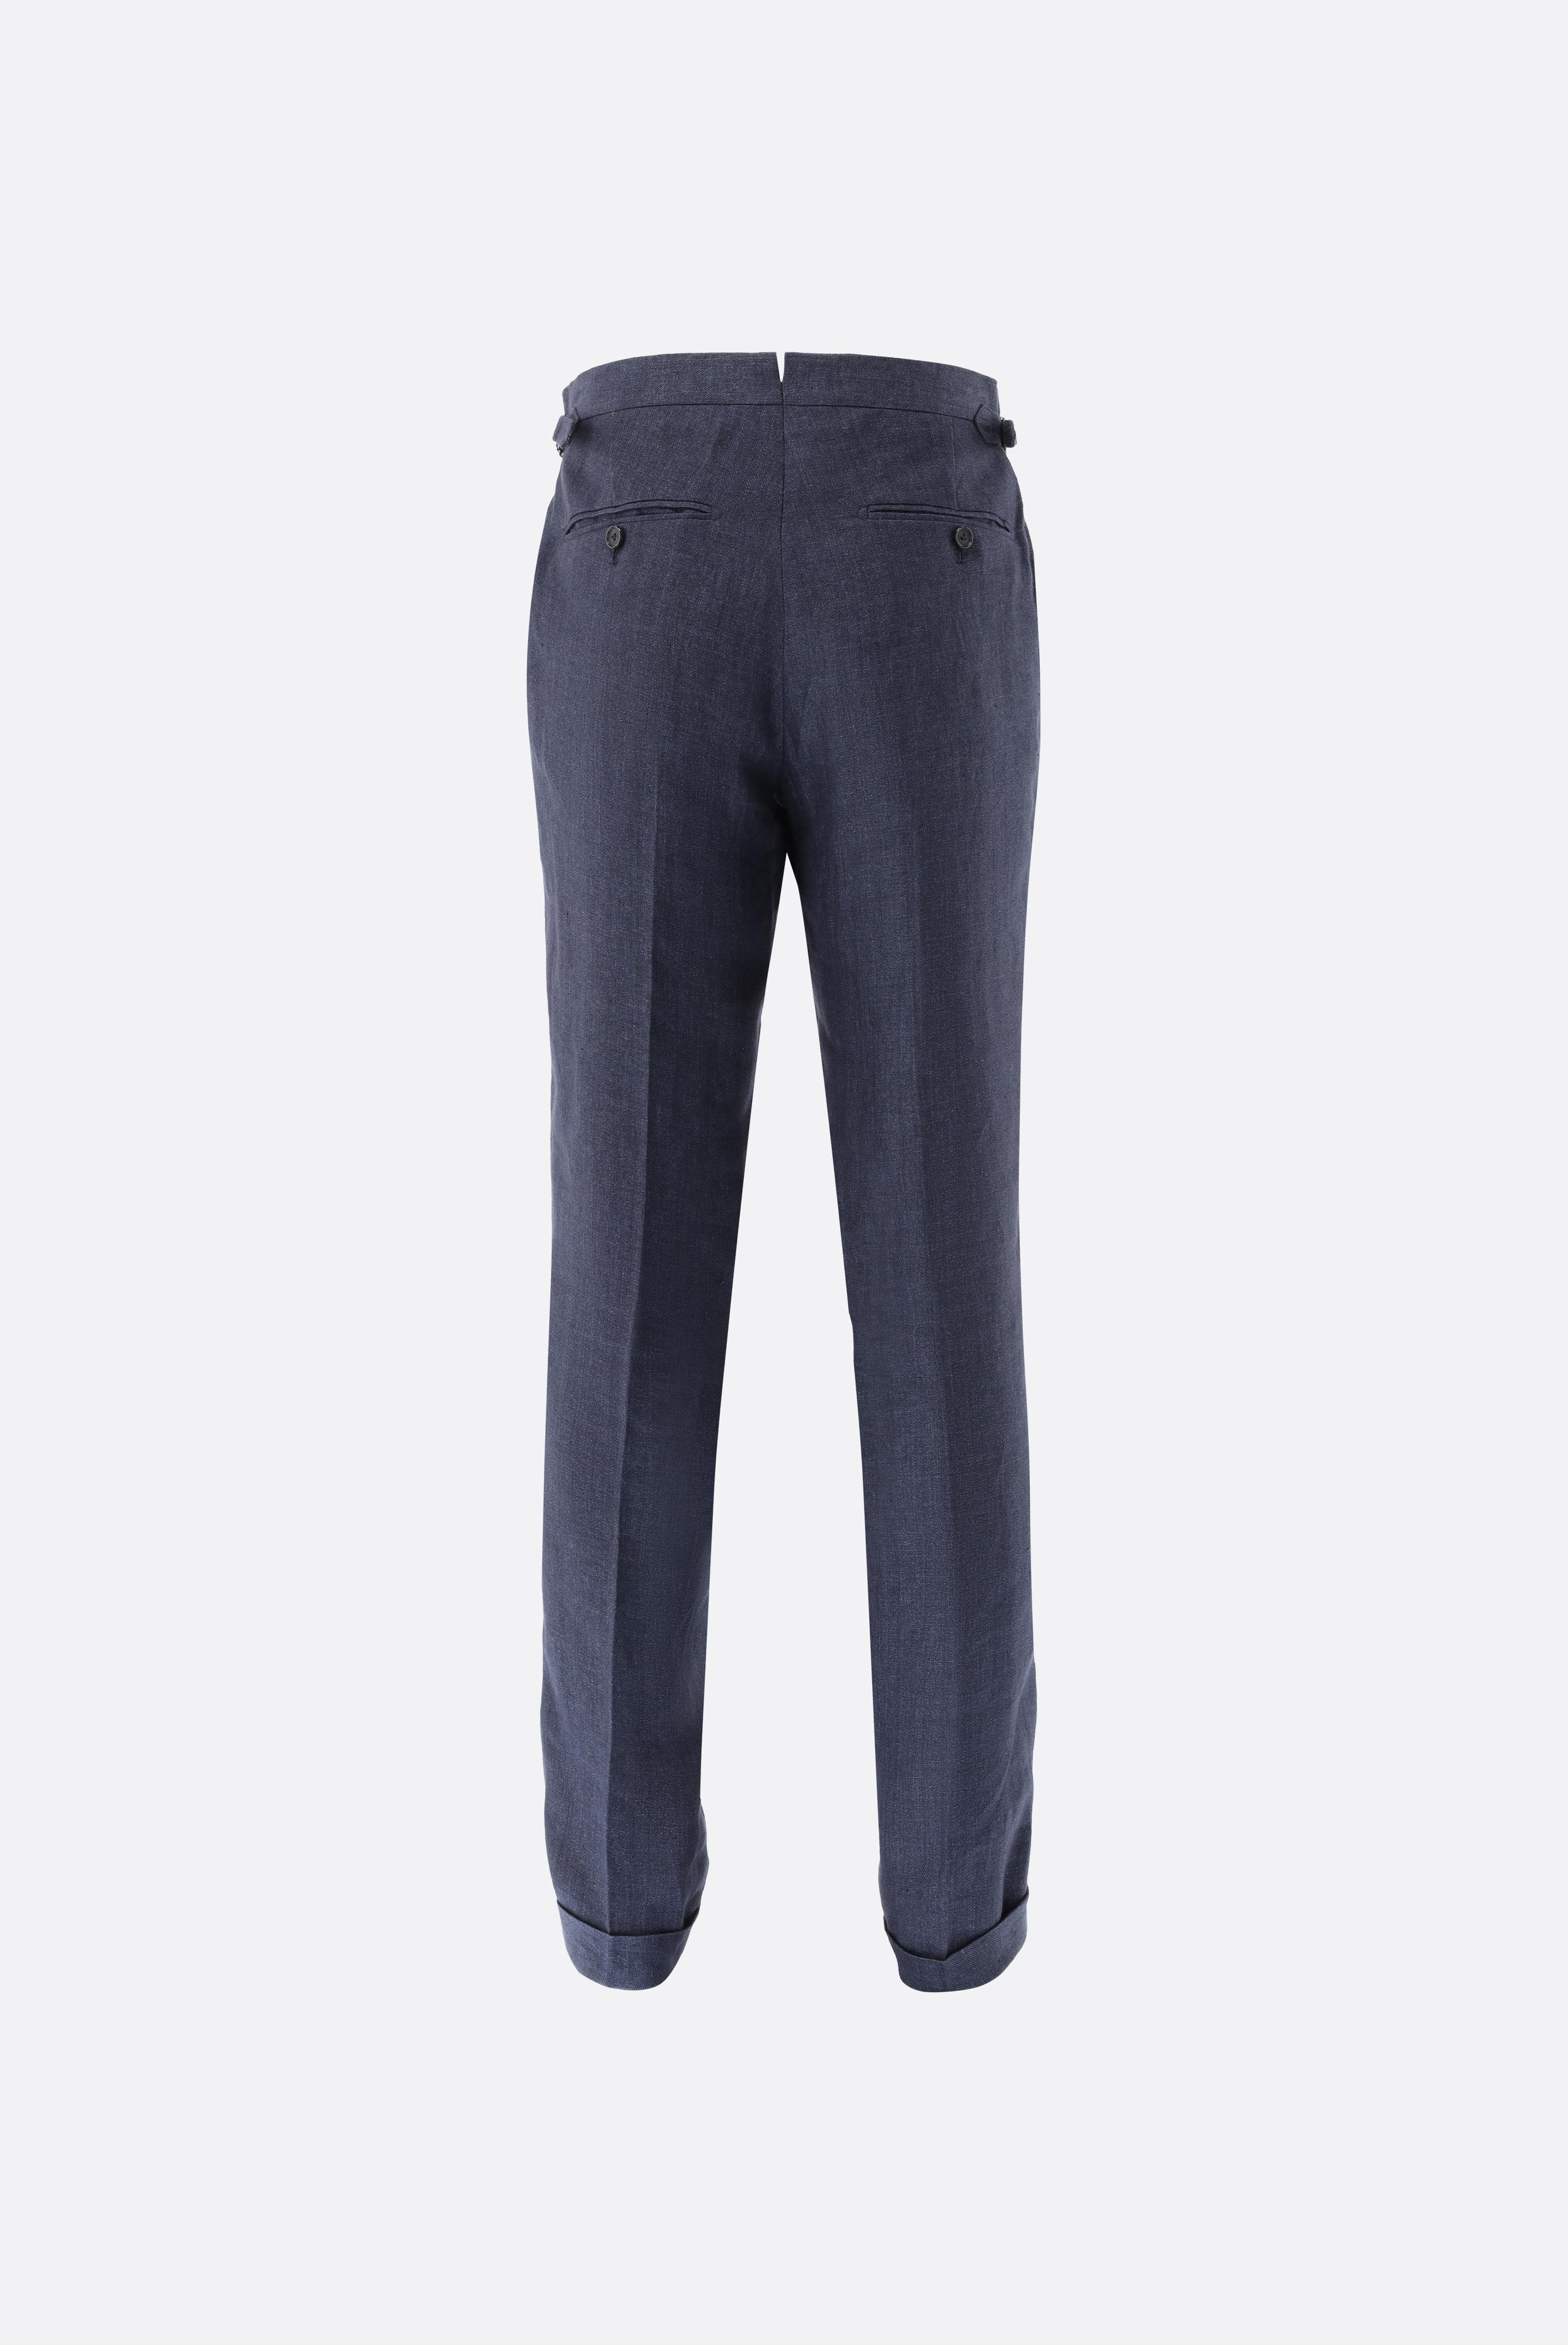 Jeans & Trousers+Linen trousers with pleats+20.7814.15.H55027.790.54